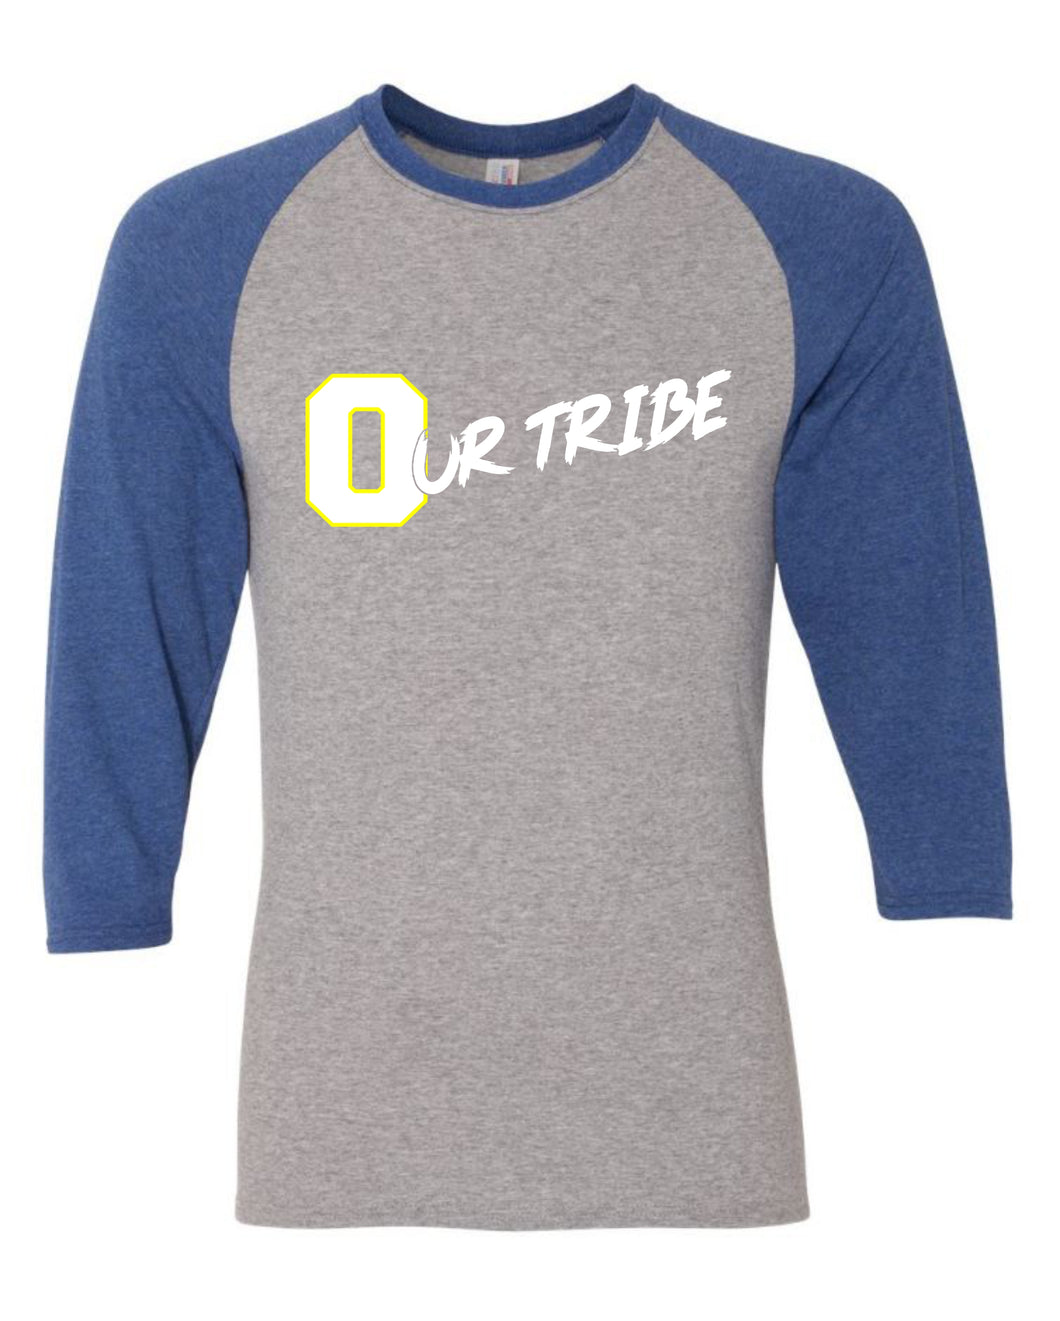 Our Tribe Gray and White Raglan Unisex